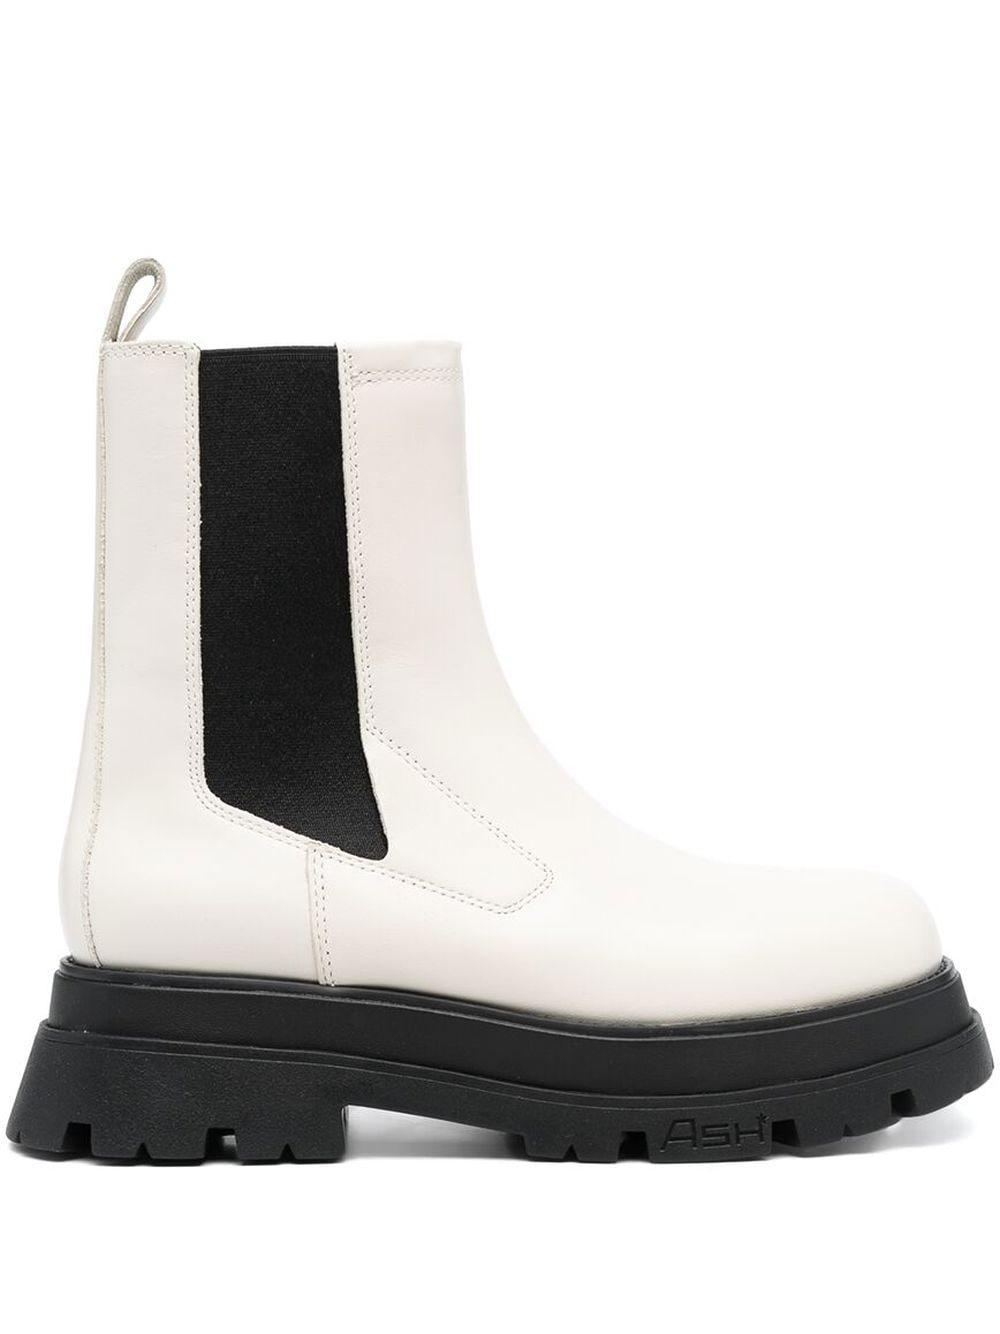 Ash Elasticated Ankle Boots in White | Lyst UK